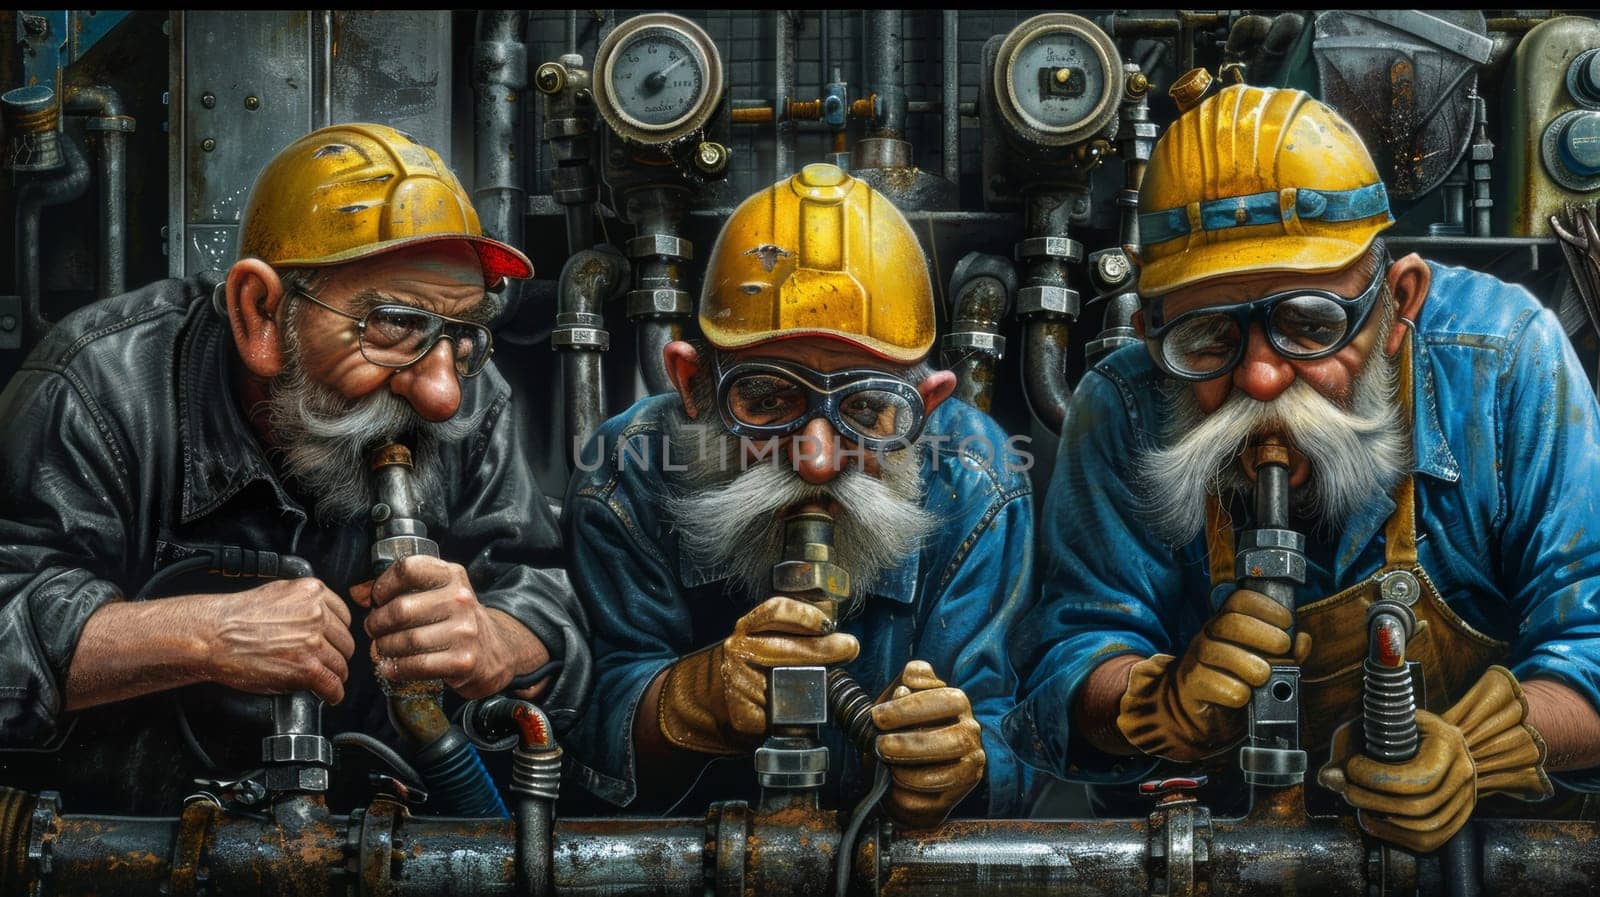 A painting of three men with hard hats and yellow safety vests